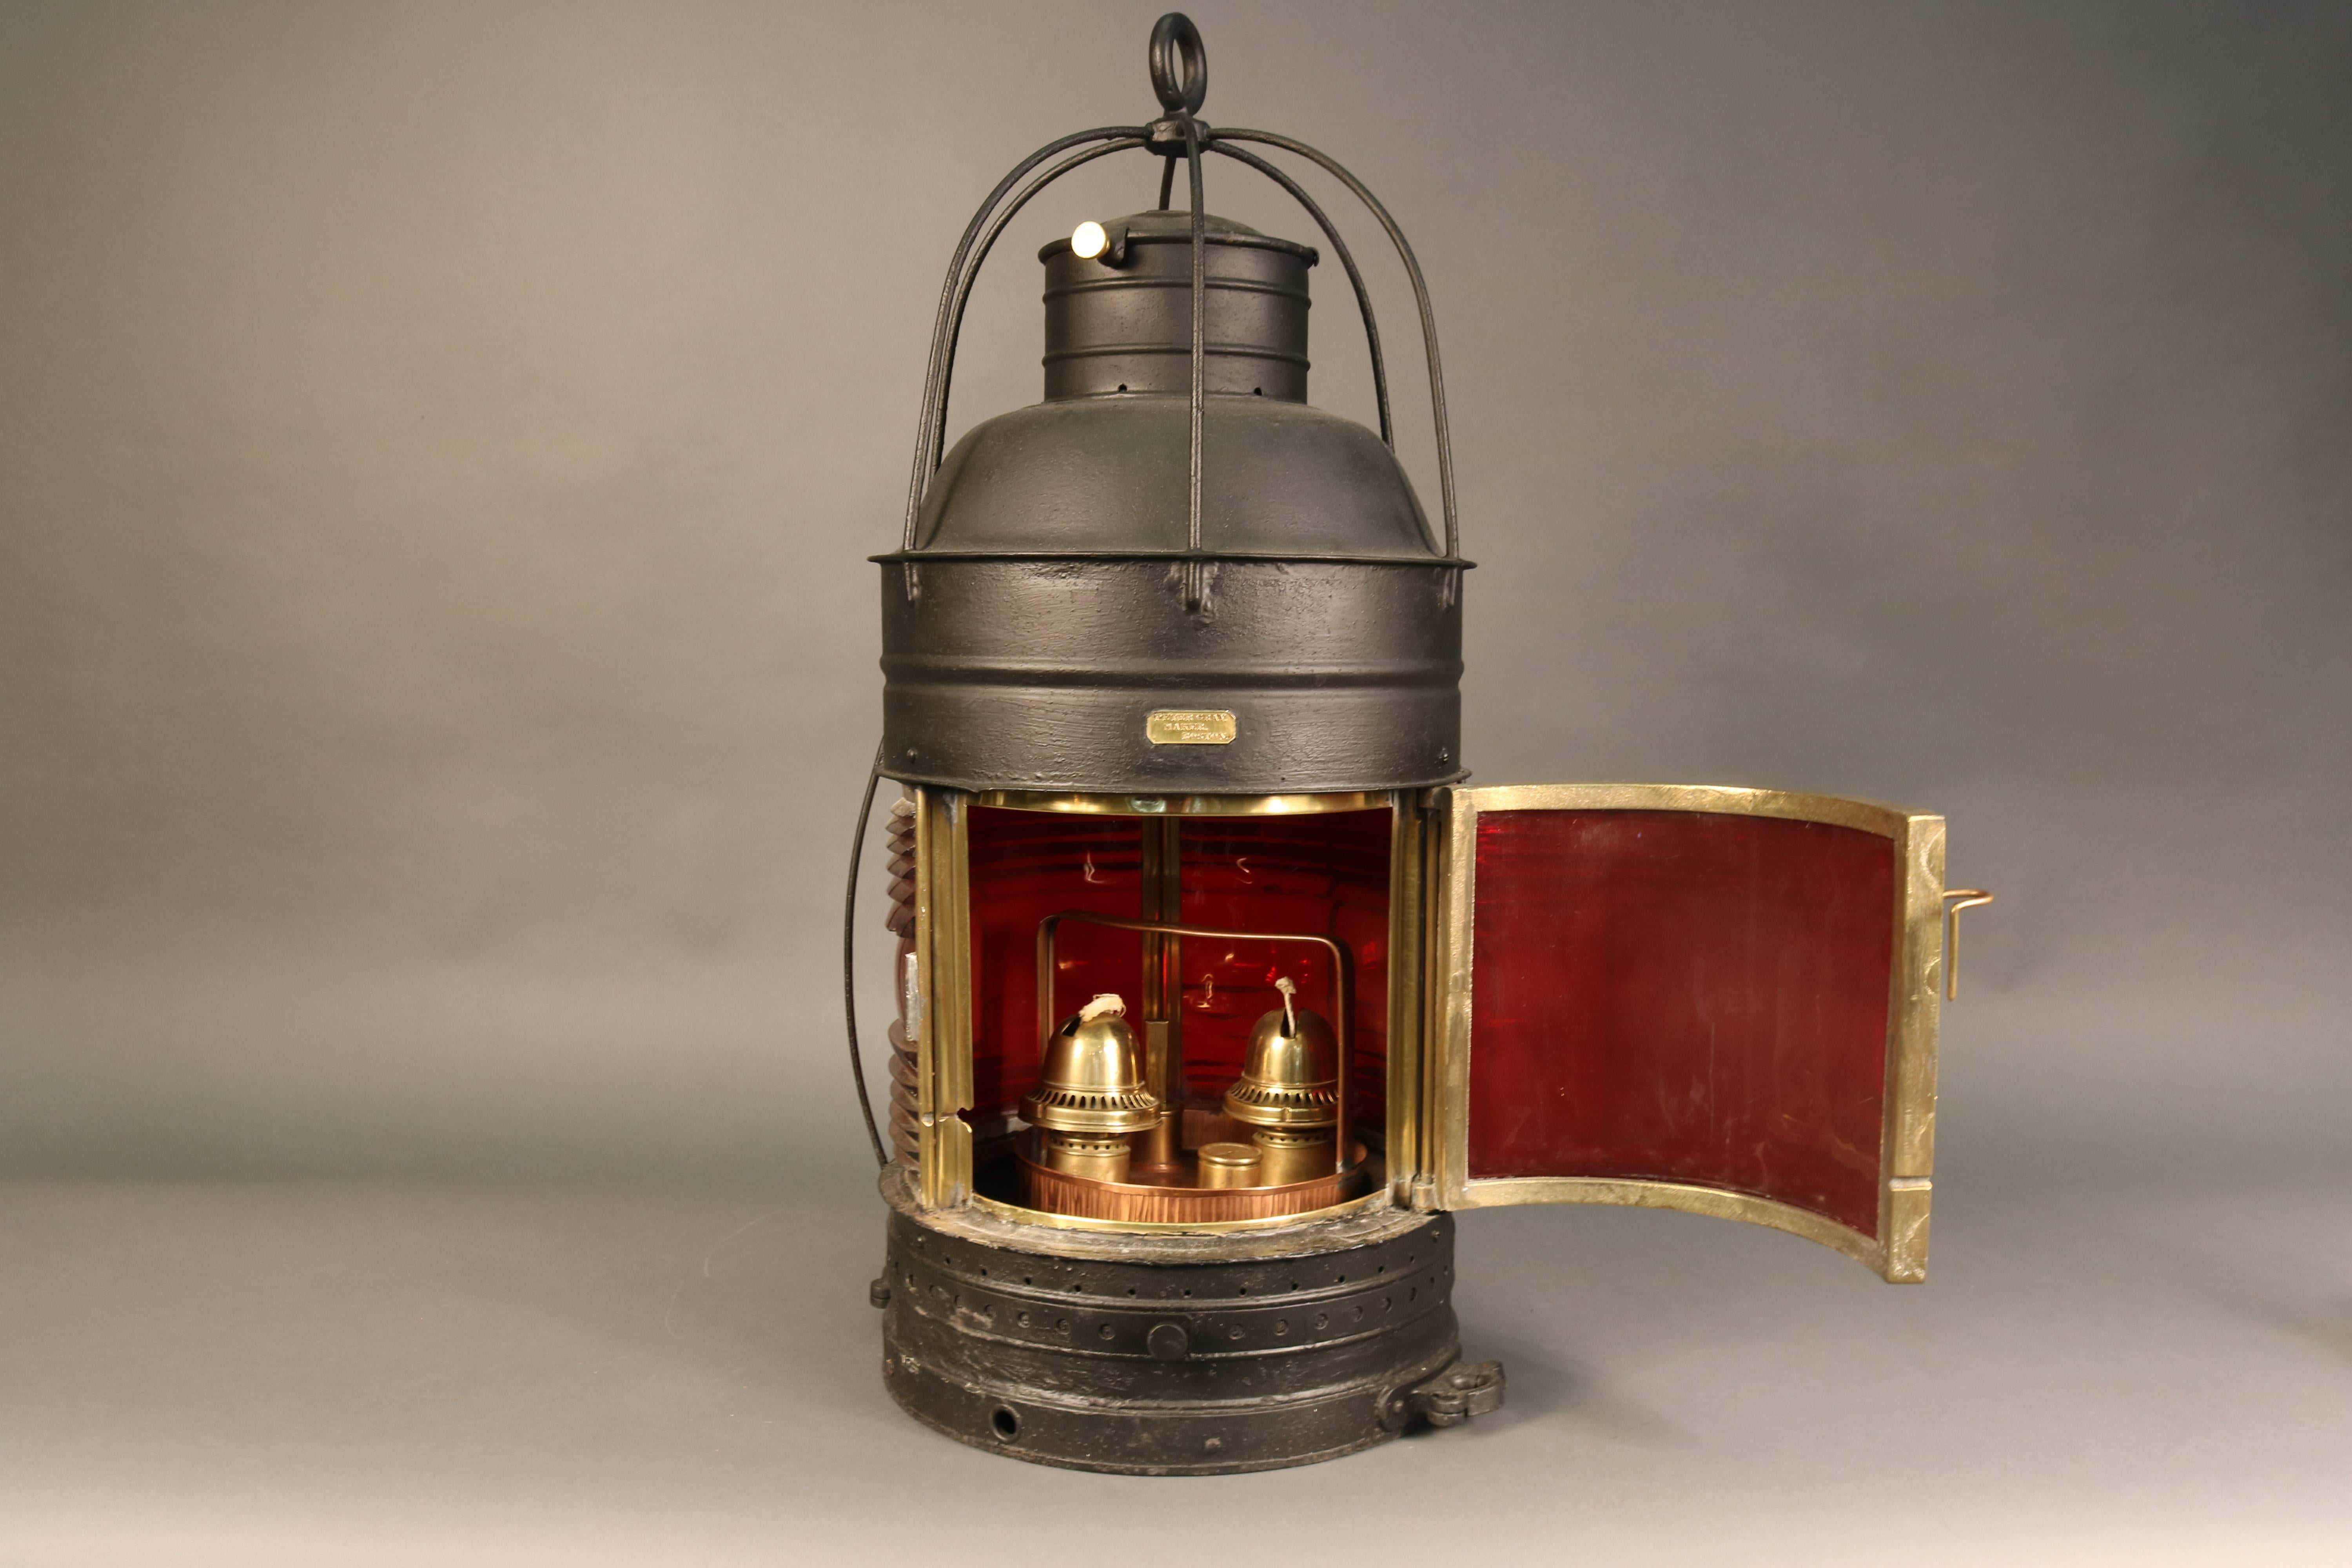 U.S. Lighthouse Service beacon by Peter Gray of Boston. Interesting and rare red beacon of iron construction with hinged door, mounting hardware and red paneled lens. Copper burner has two geared wicks, fill hole and gauge. Burner is by